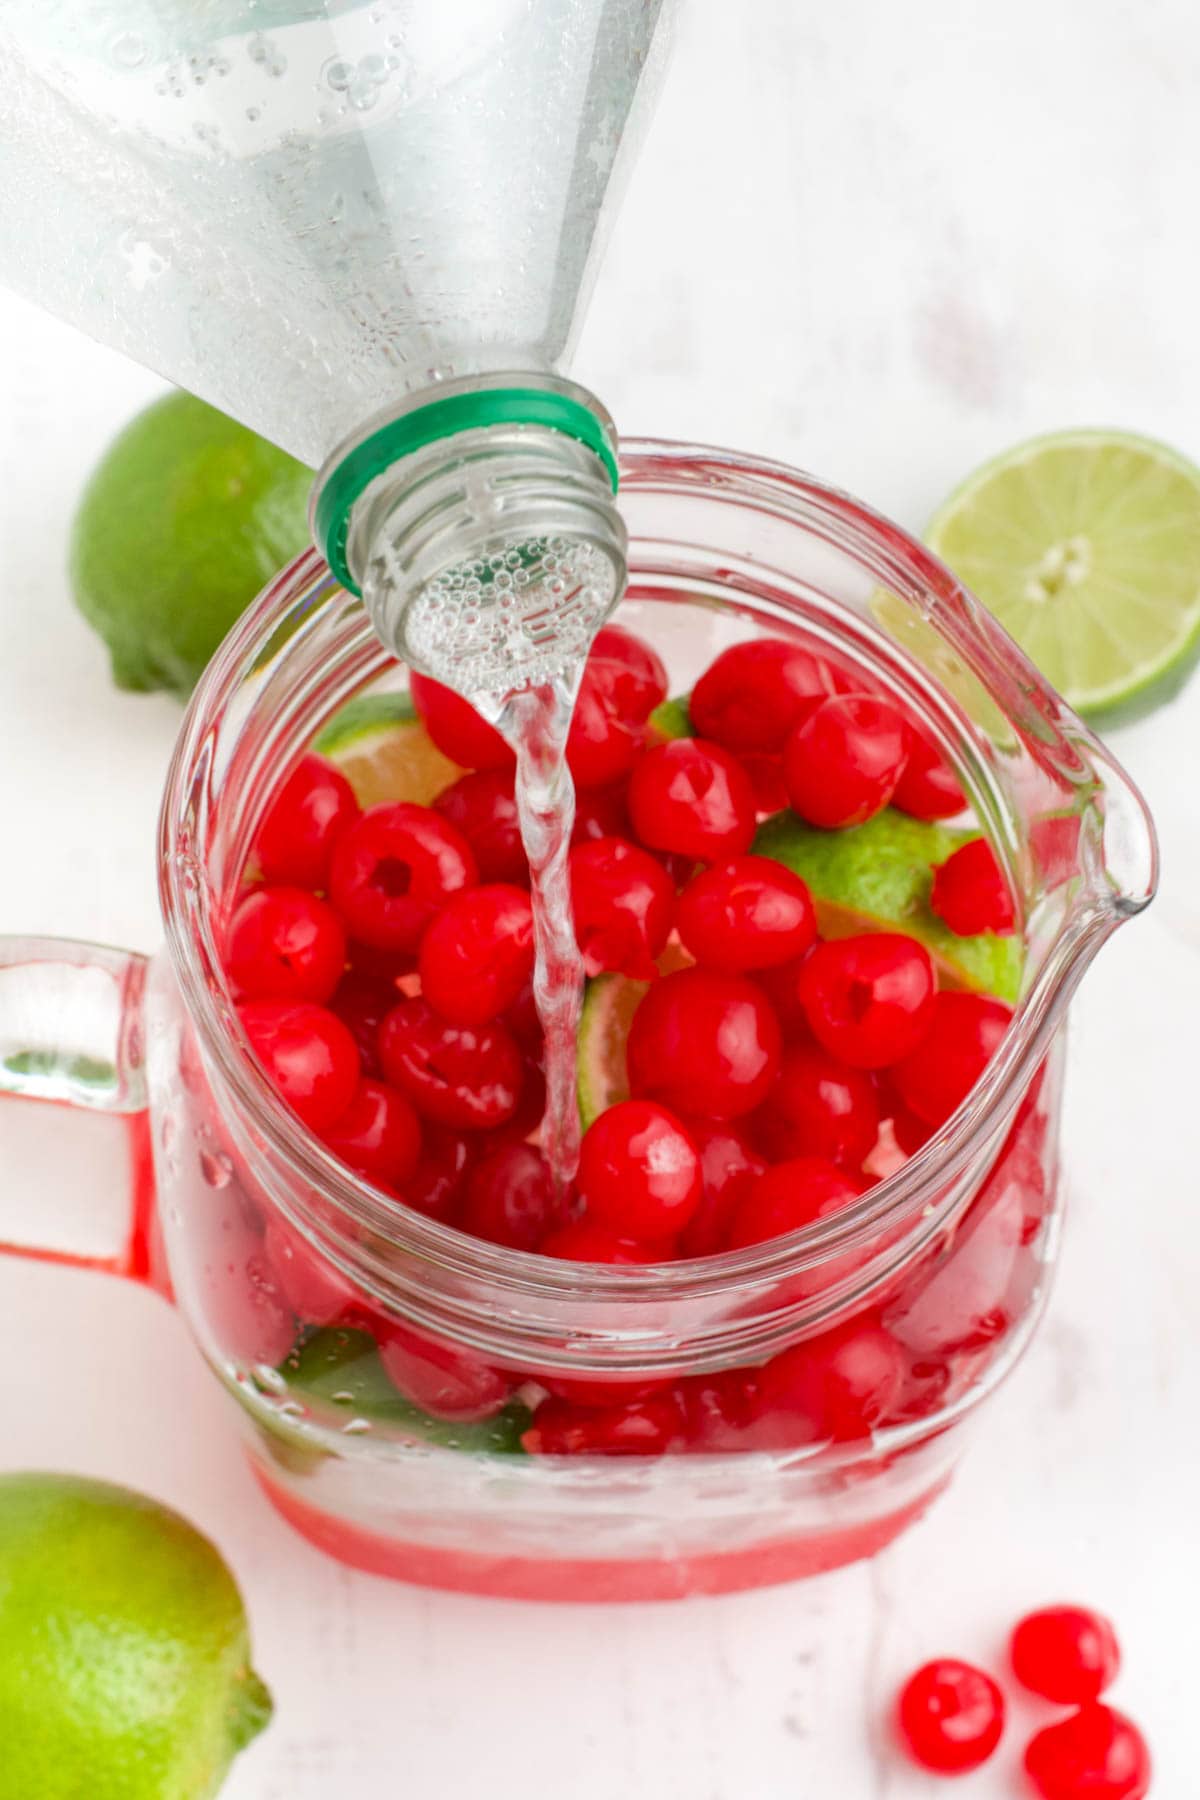 Pouring Sprite from a bottle into a large pitcher of cherries and limes.